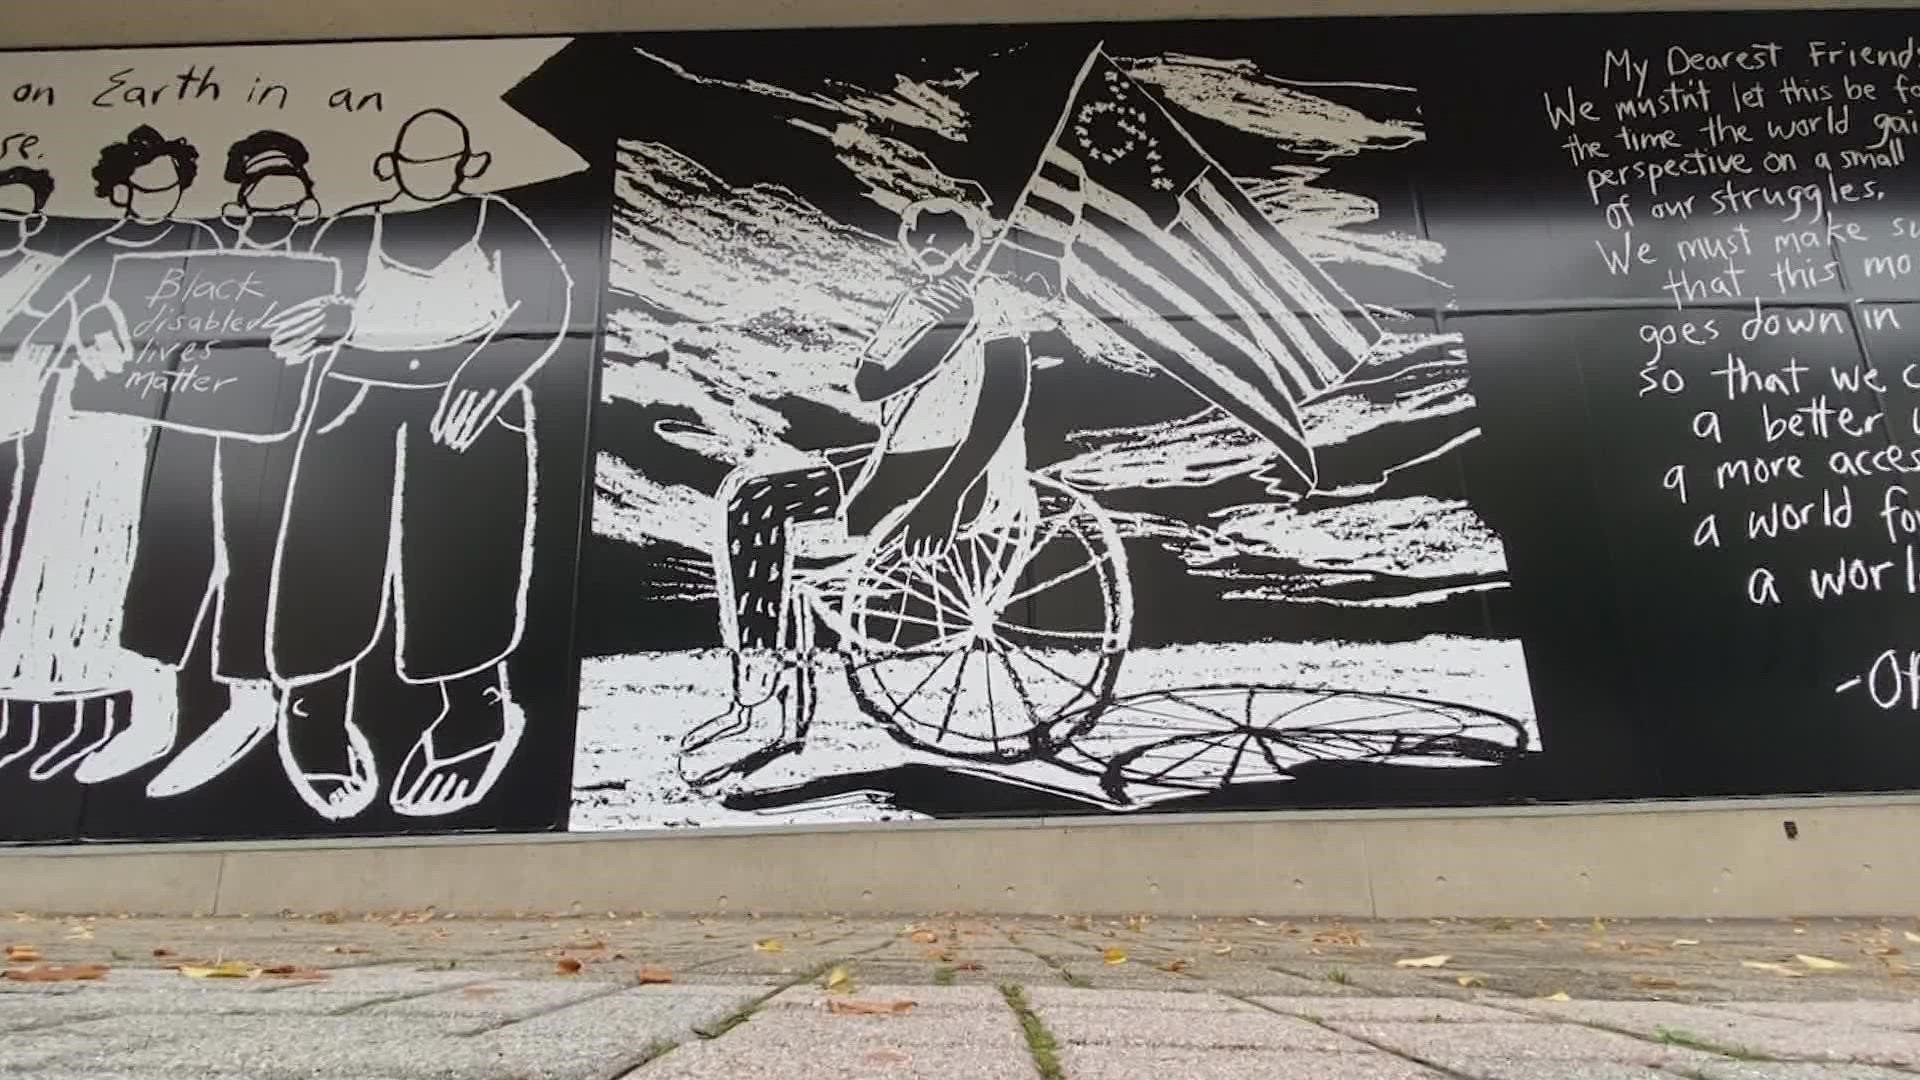 Artists took the stories of those during the pandemic and created artwork that is showcased outside the Grand Rapids Public Museum during ArtPrize.